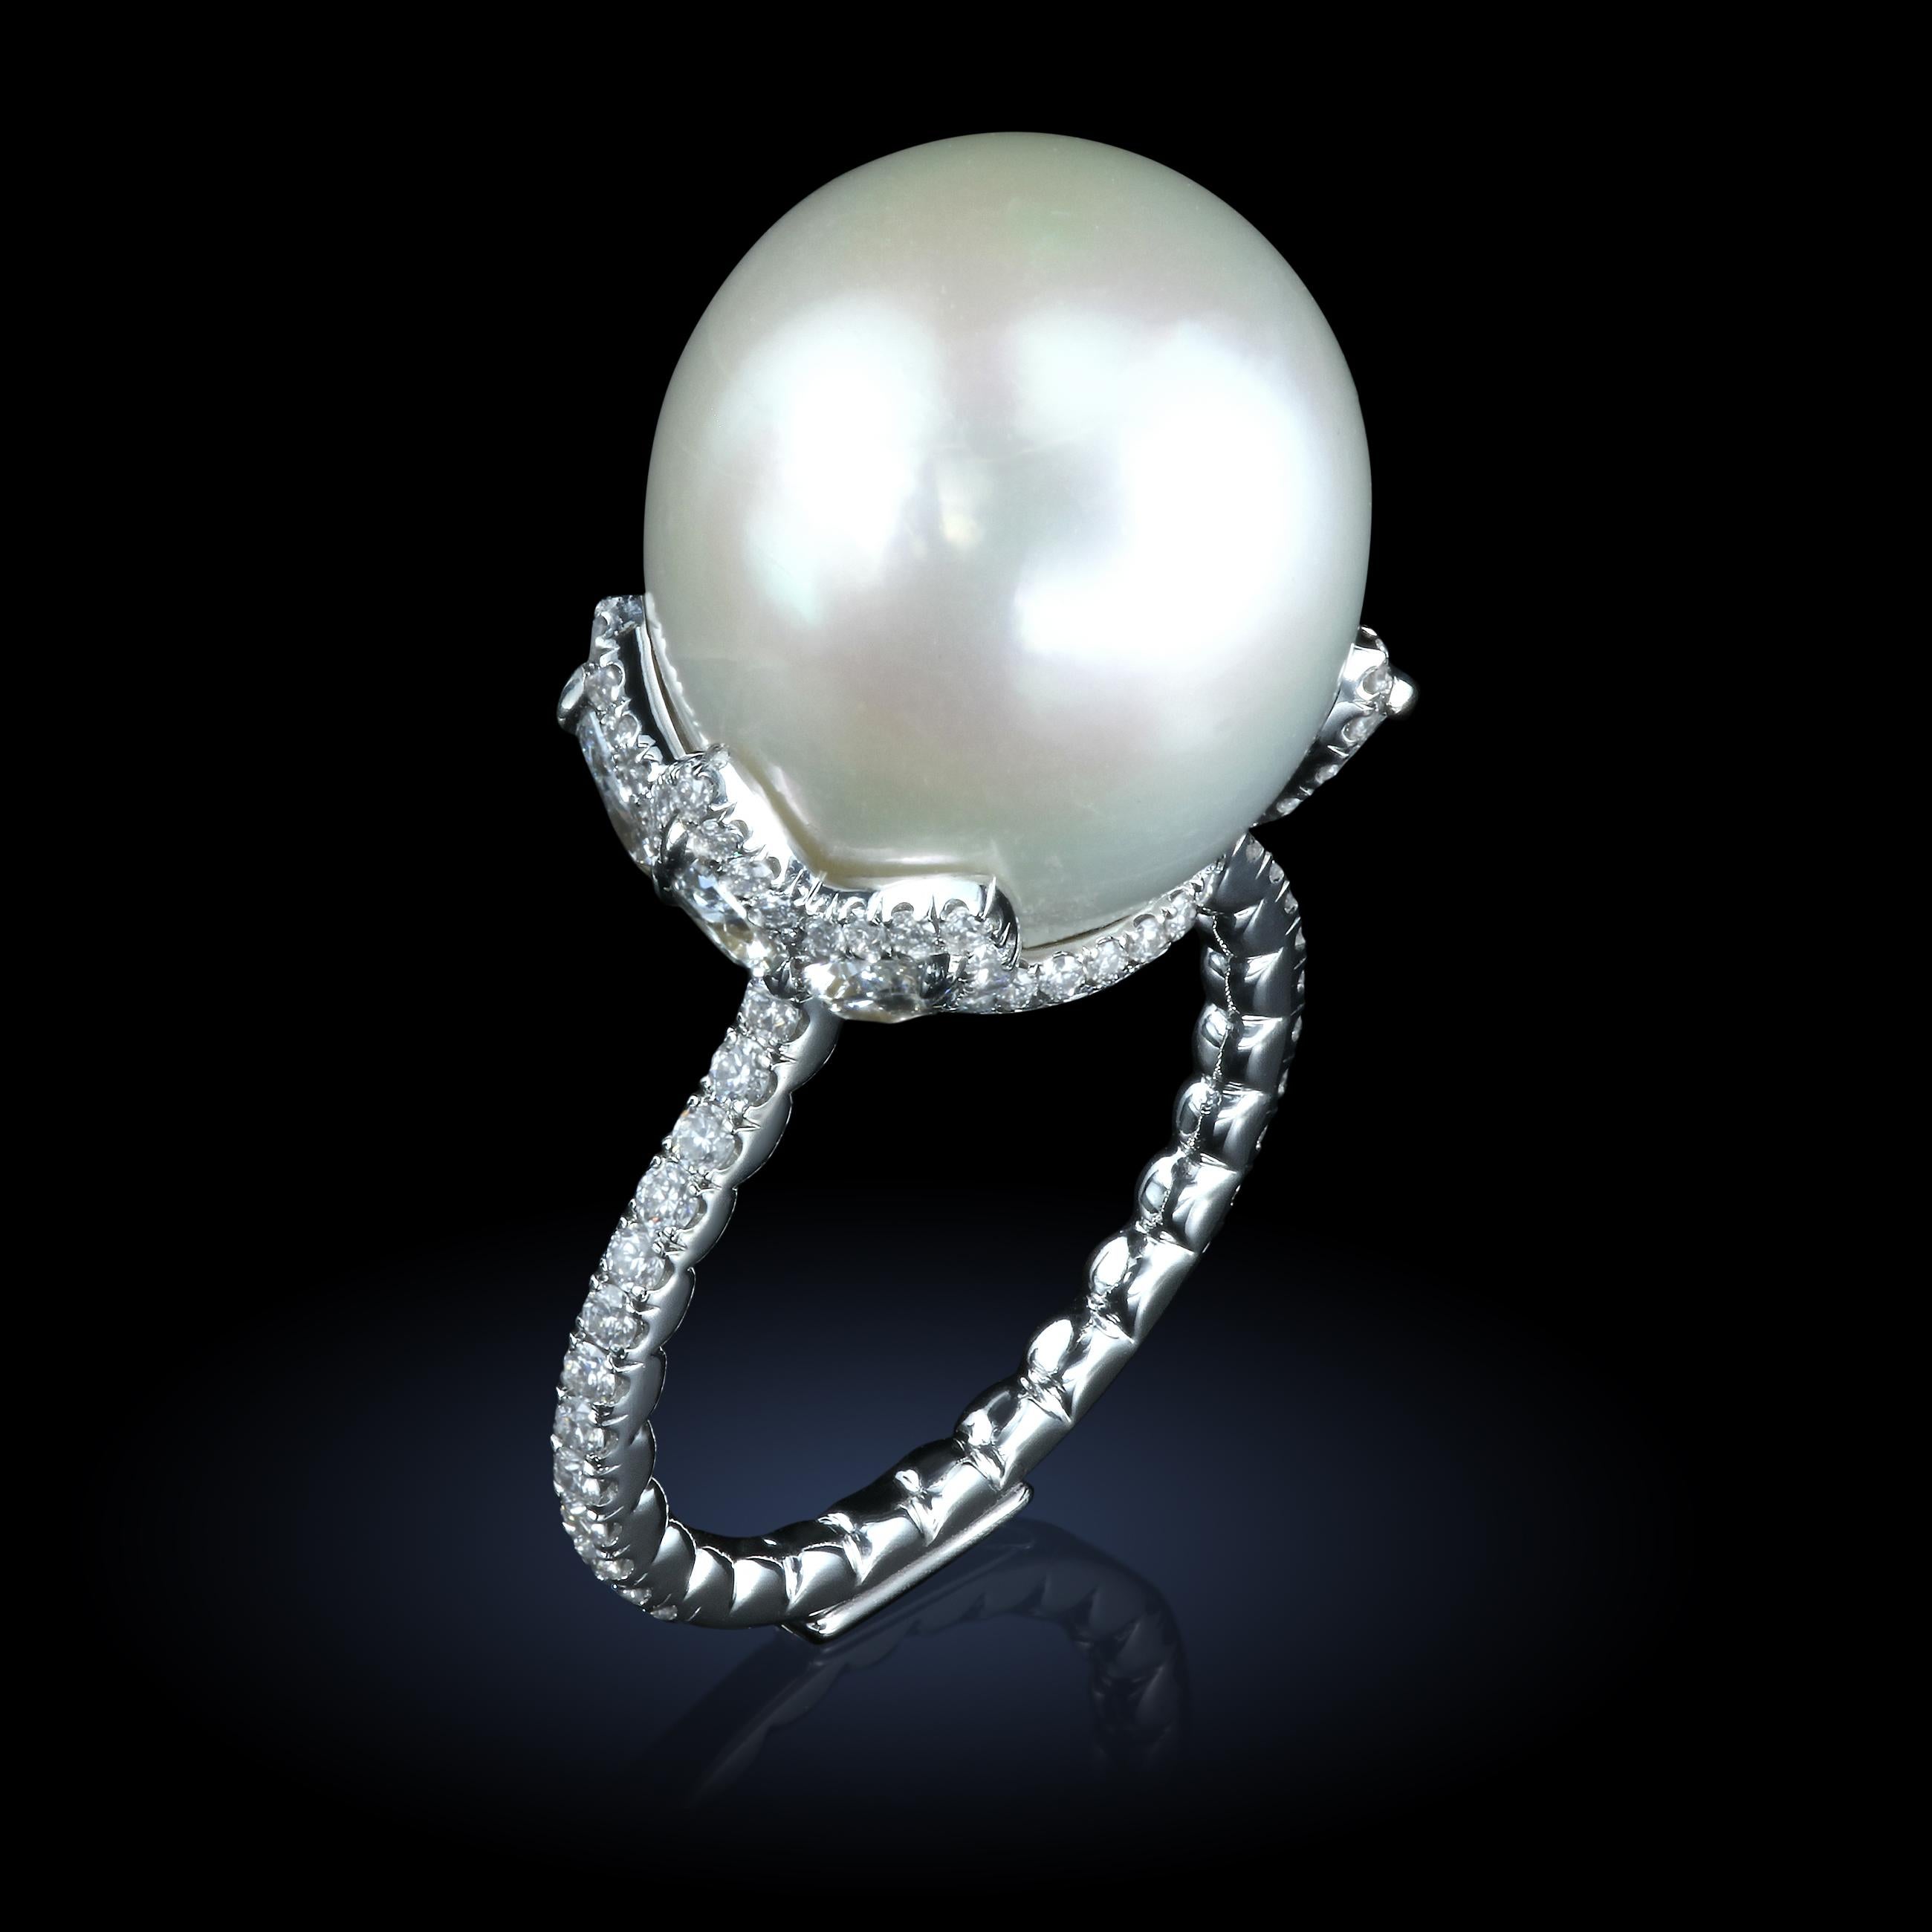 Pearl and diamond platinum ring by the world-famous jewelry designer Maestro Leon Mege.
Finger size: US - 5 3/4 

15x17 mm white South Sea Pearl
6 pear shape diamonds 1.03 carats total weight
128 full cut diamonds 0.93 carats total weight
